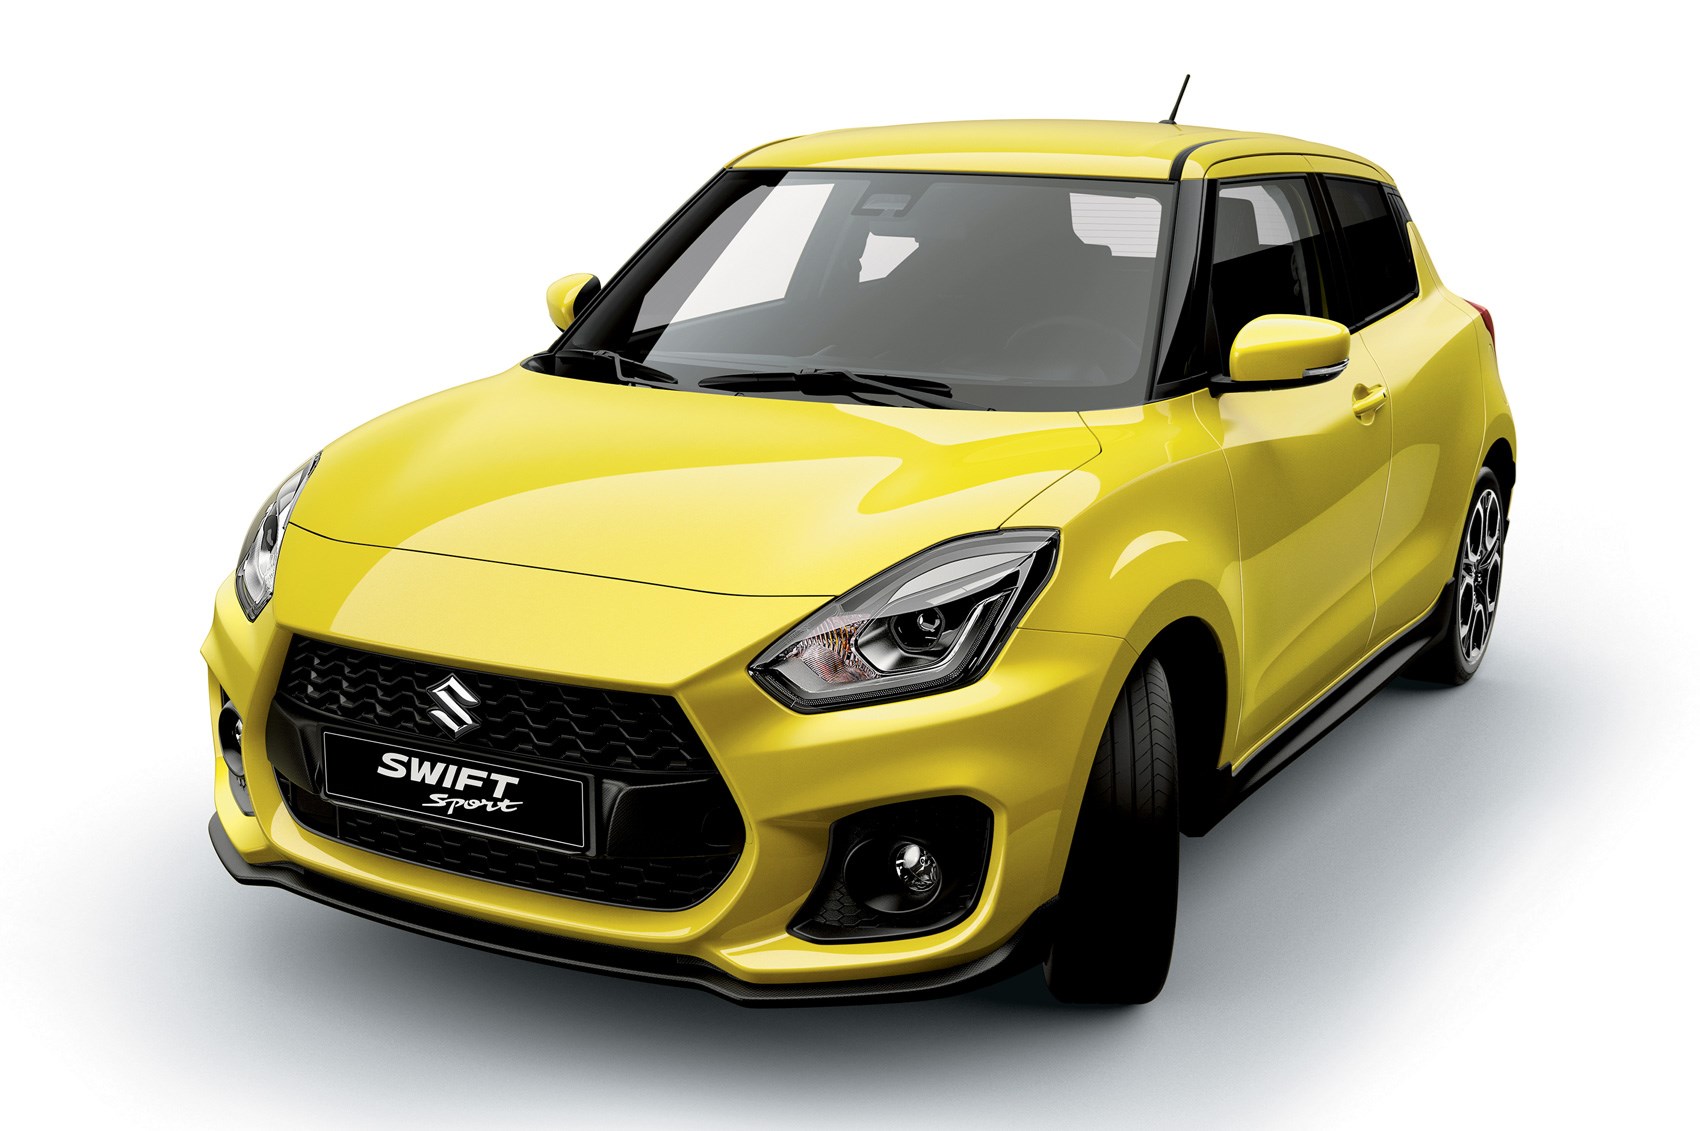 New 2017 Suzuki Swift Sport: fresh pictures of angry new hatch